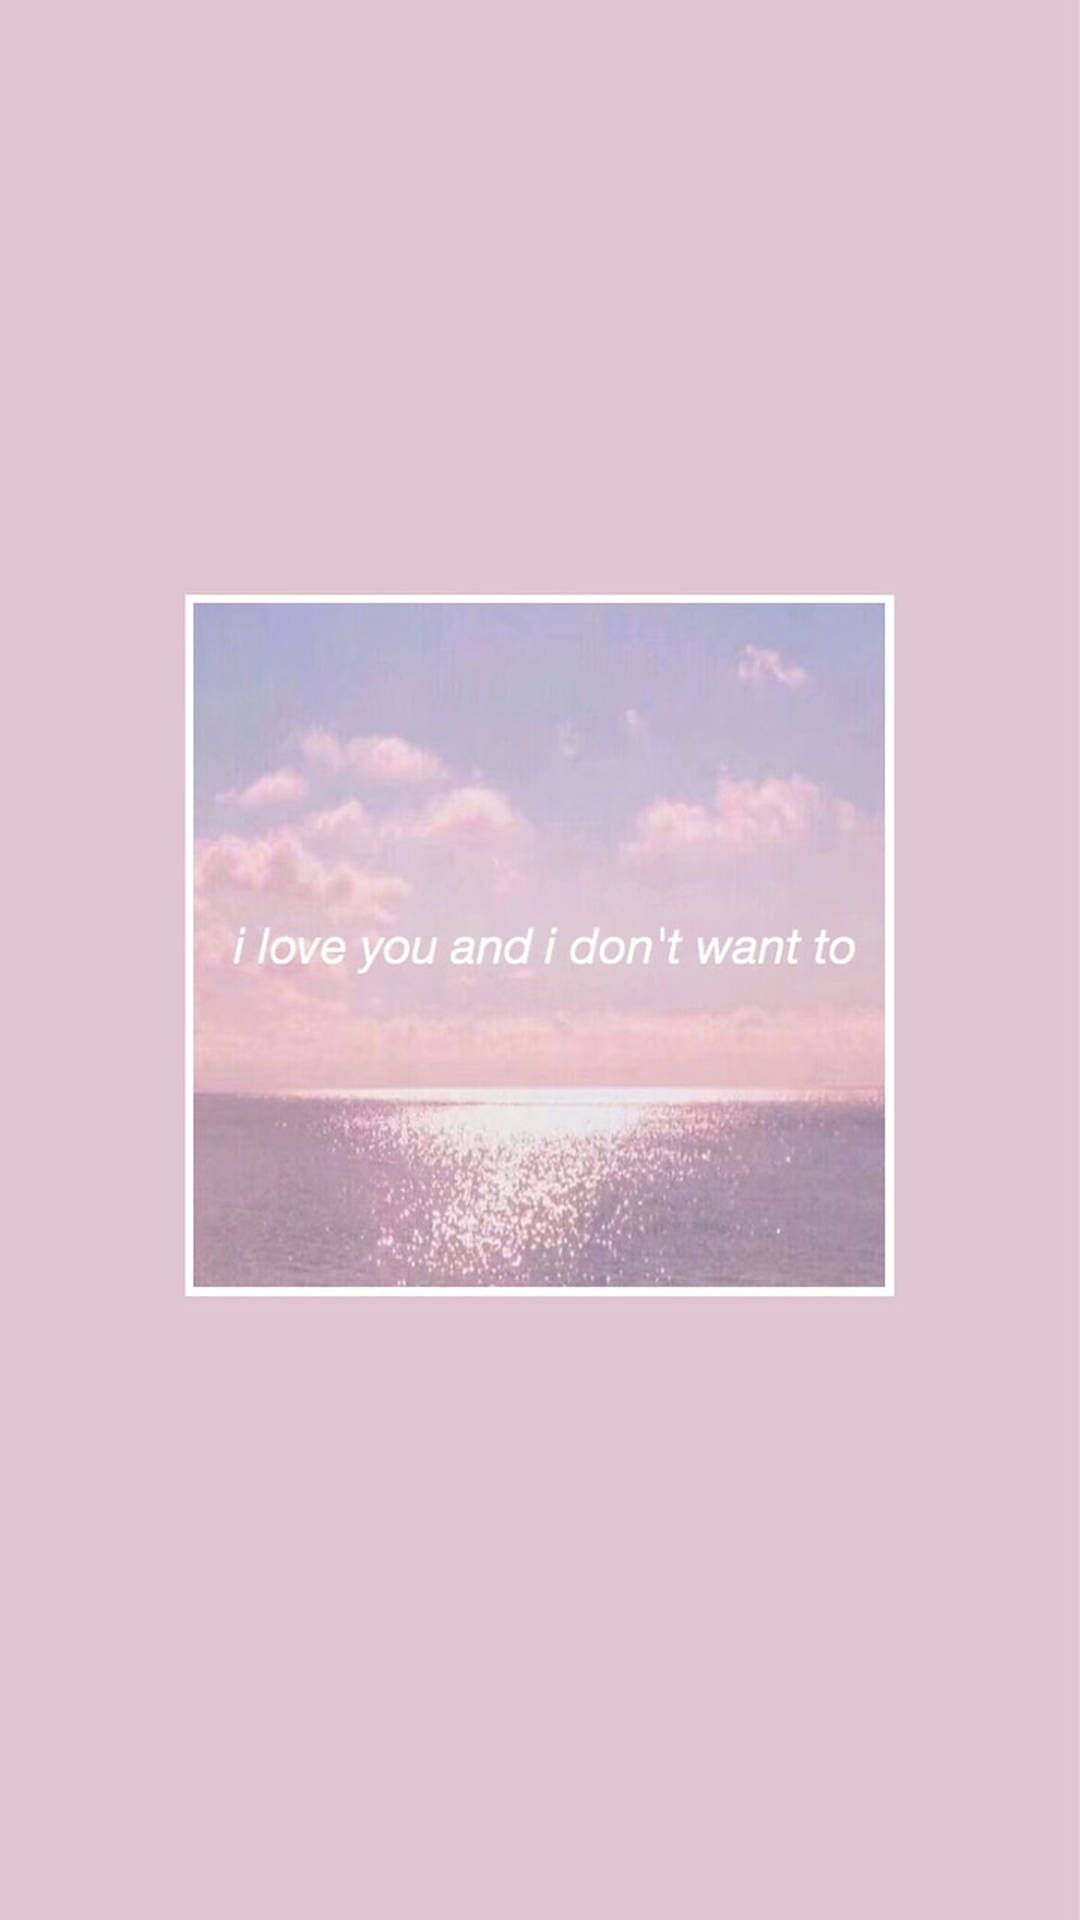 I love you and don't want to - Love